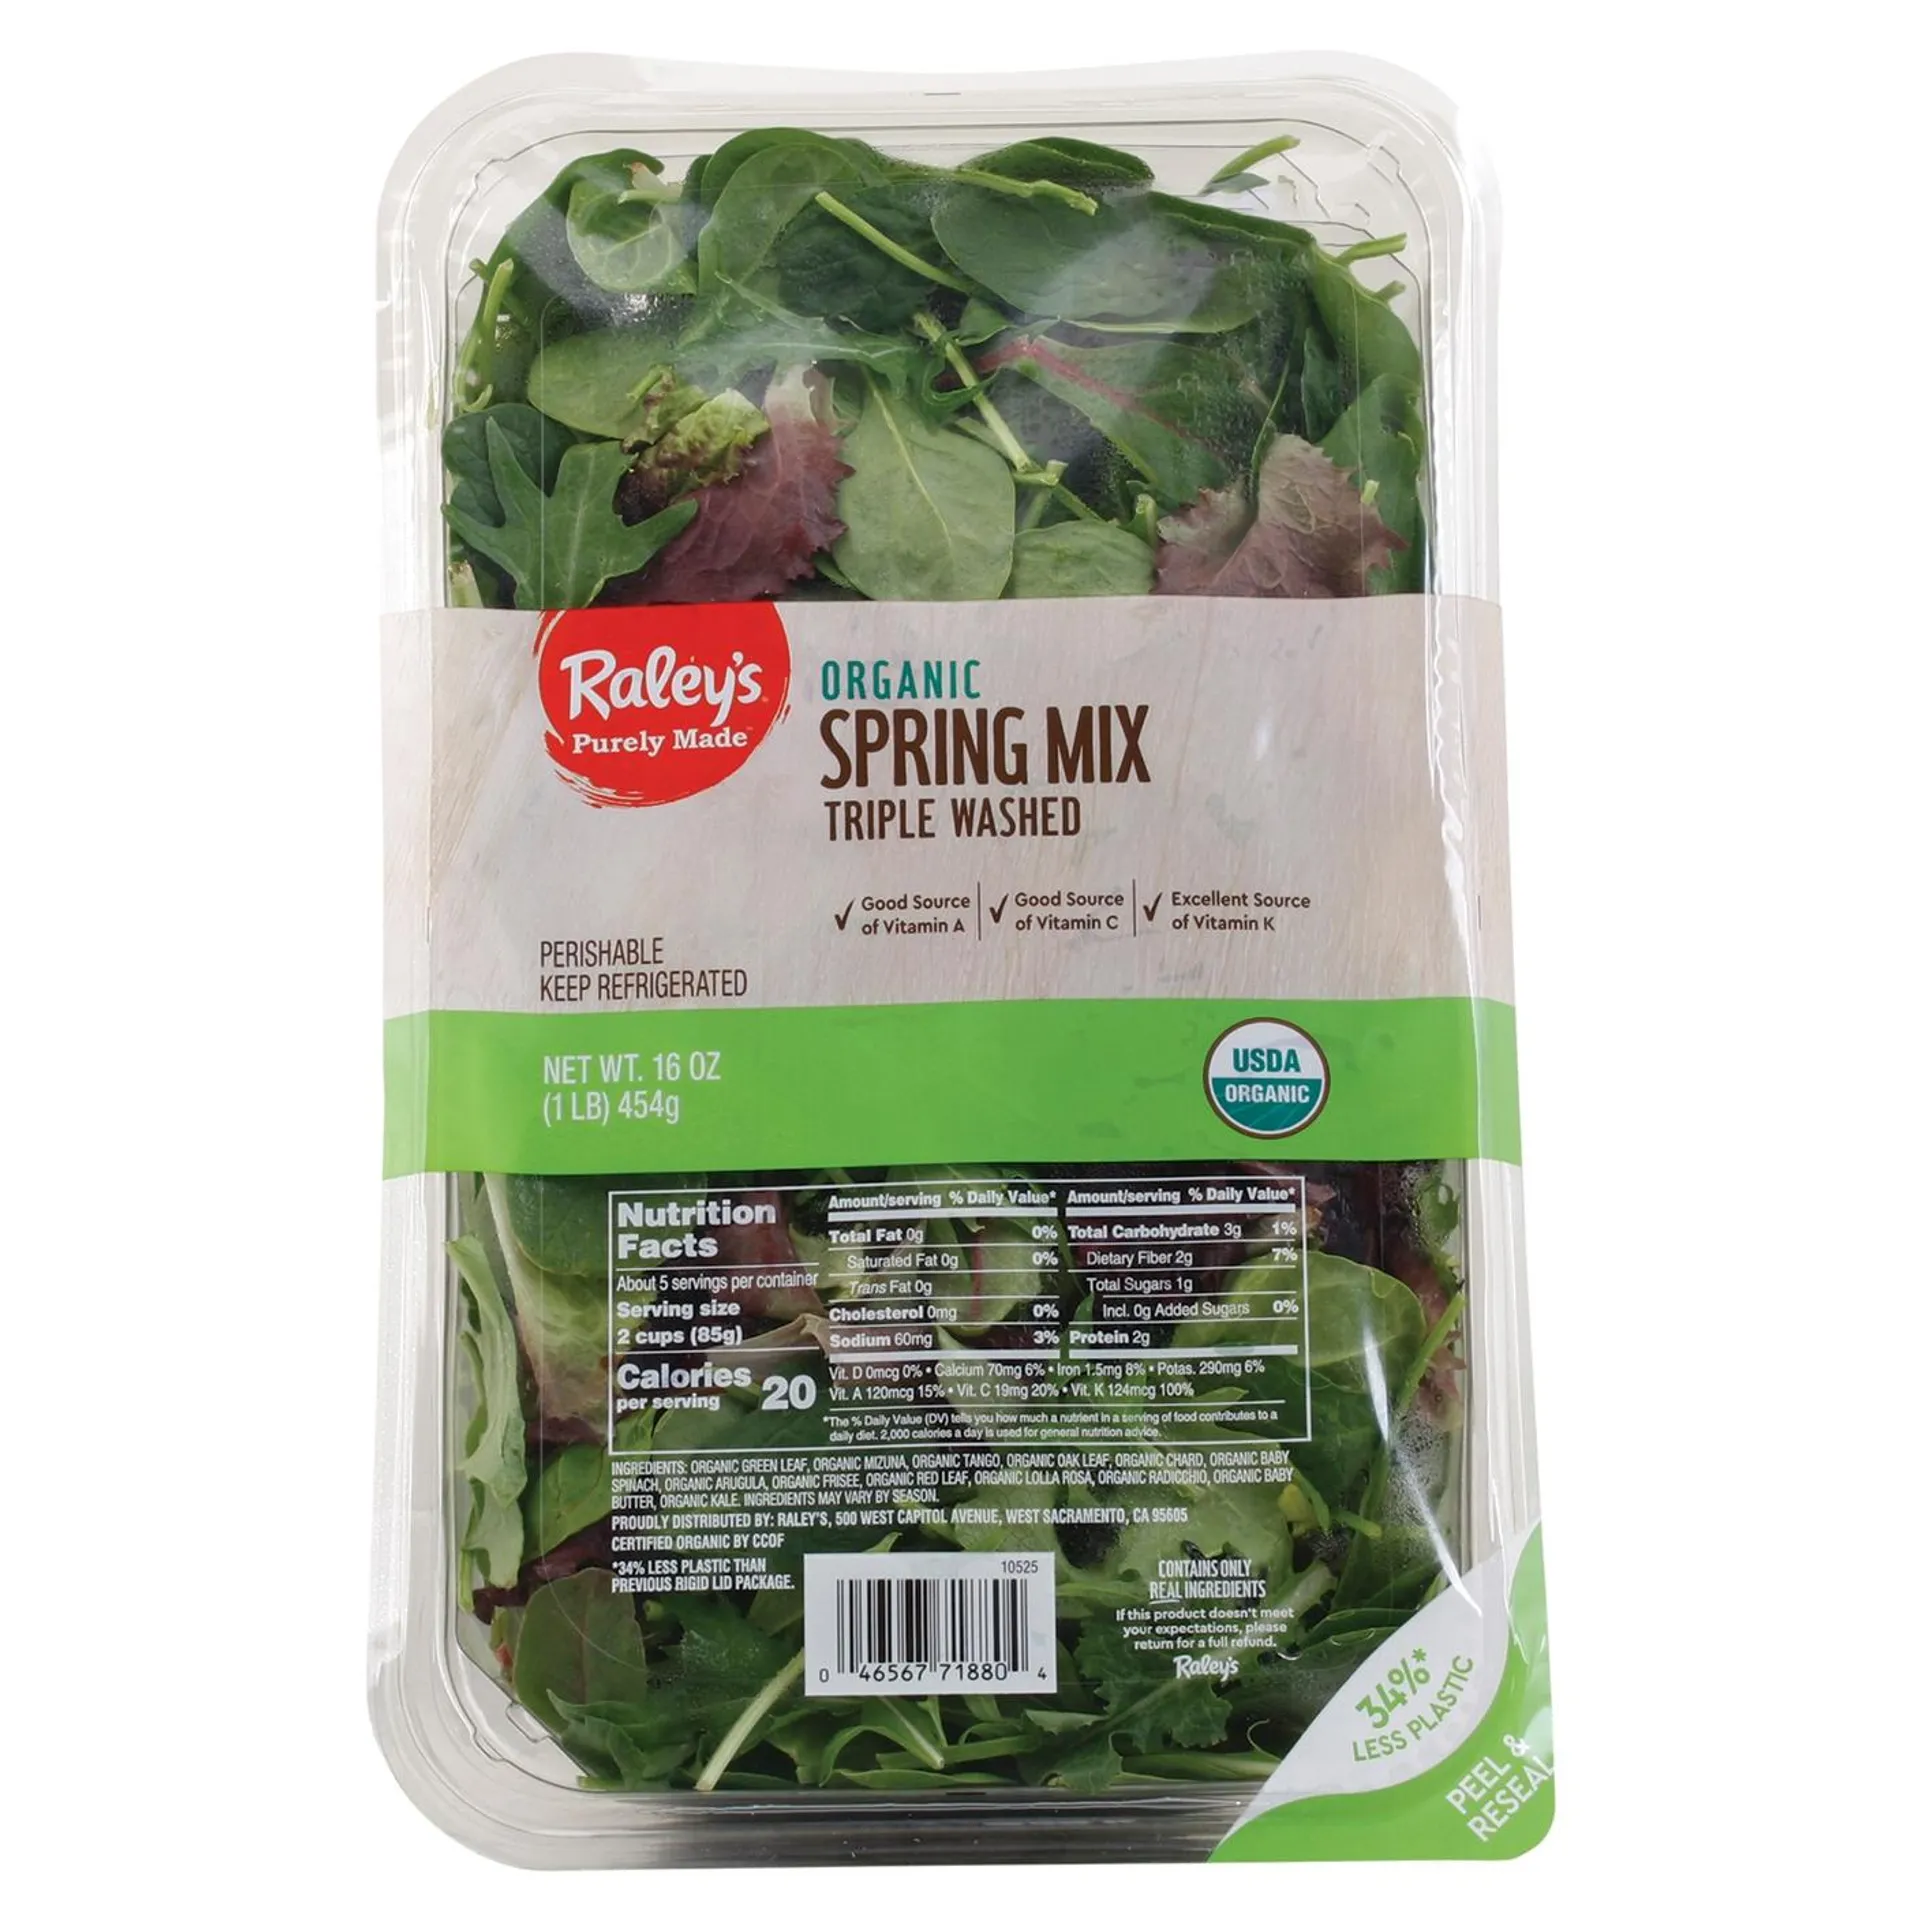 Raley's Spring Mix, Organic, Triple Washed